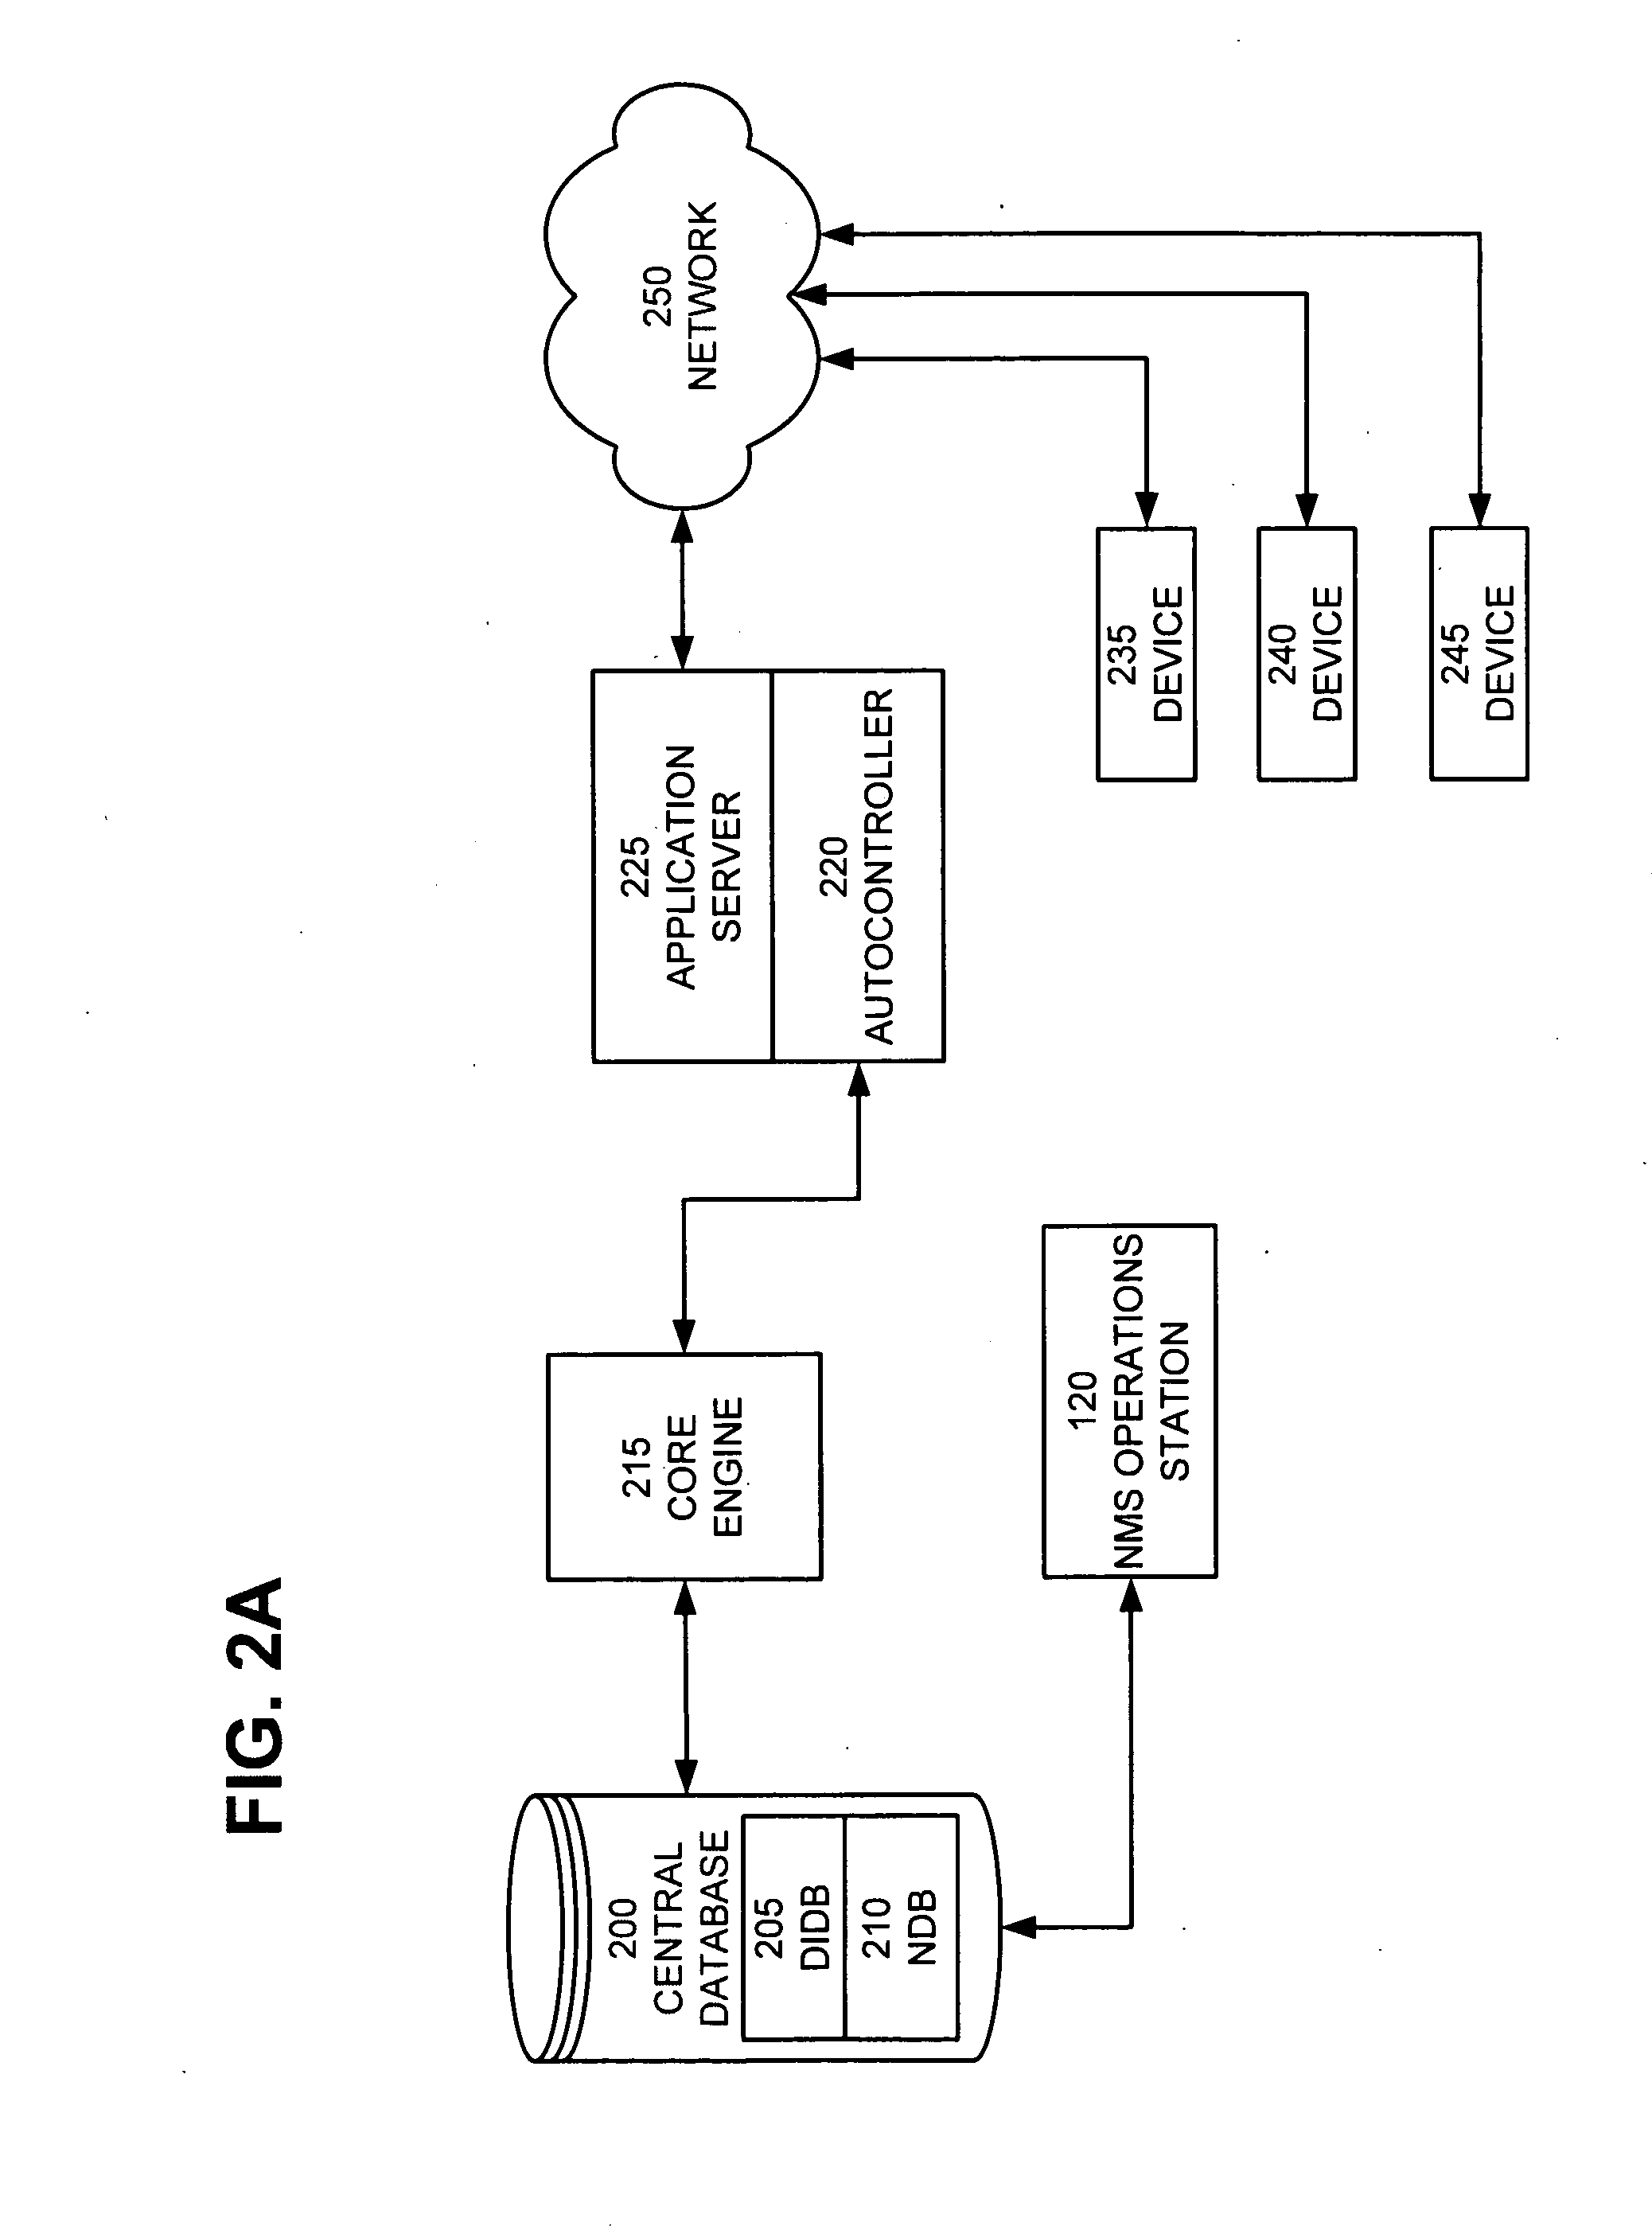 System and Method for Synchronizing the Configuration of Distributed Network Management Applications